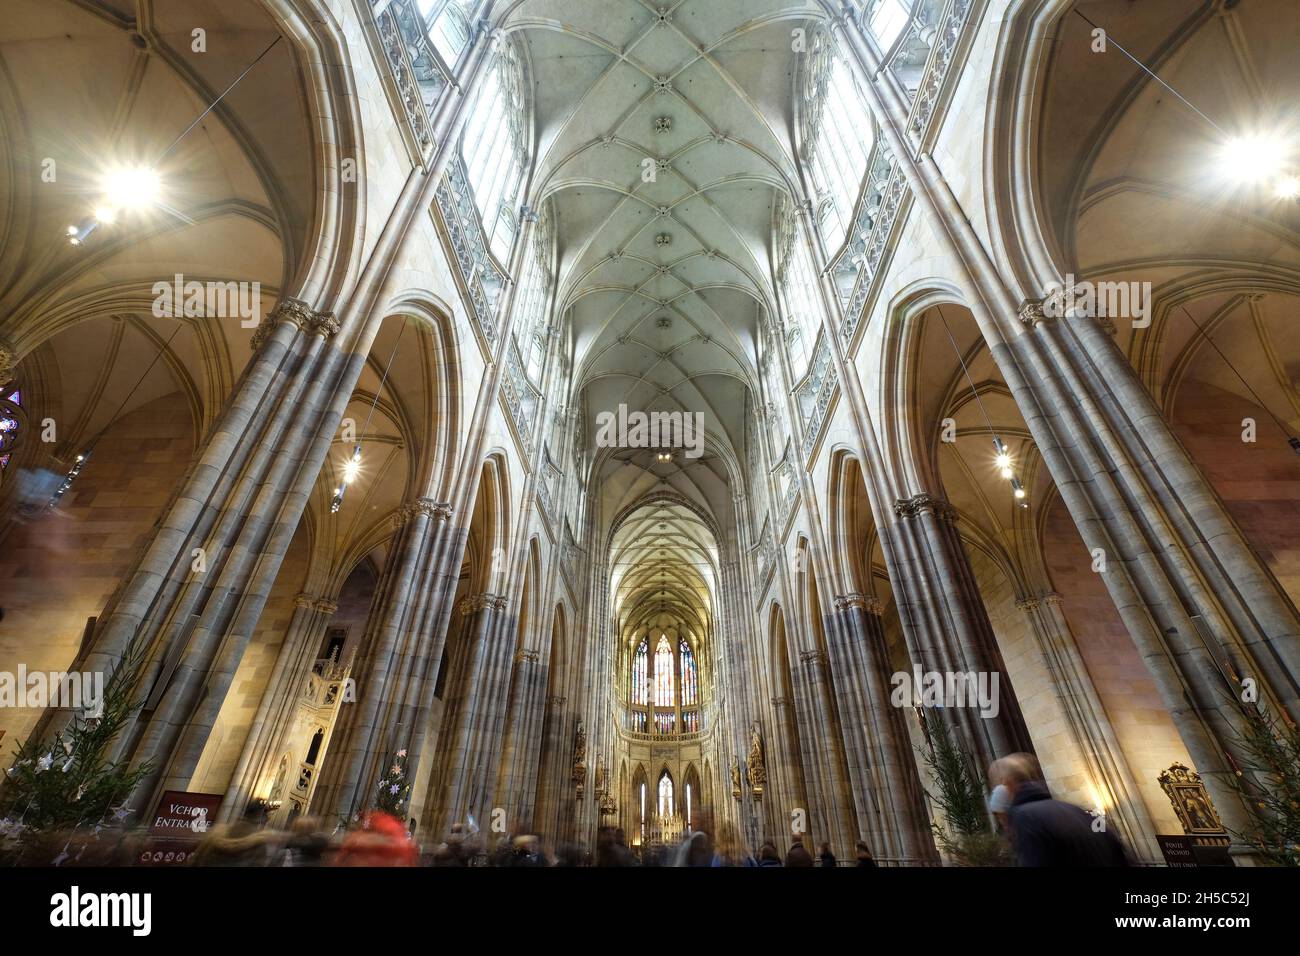 View inside the historic St. Vitus Cathedral in Prague, located within the walls of Prague Castle, Czech Rebublic Stock Photo